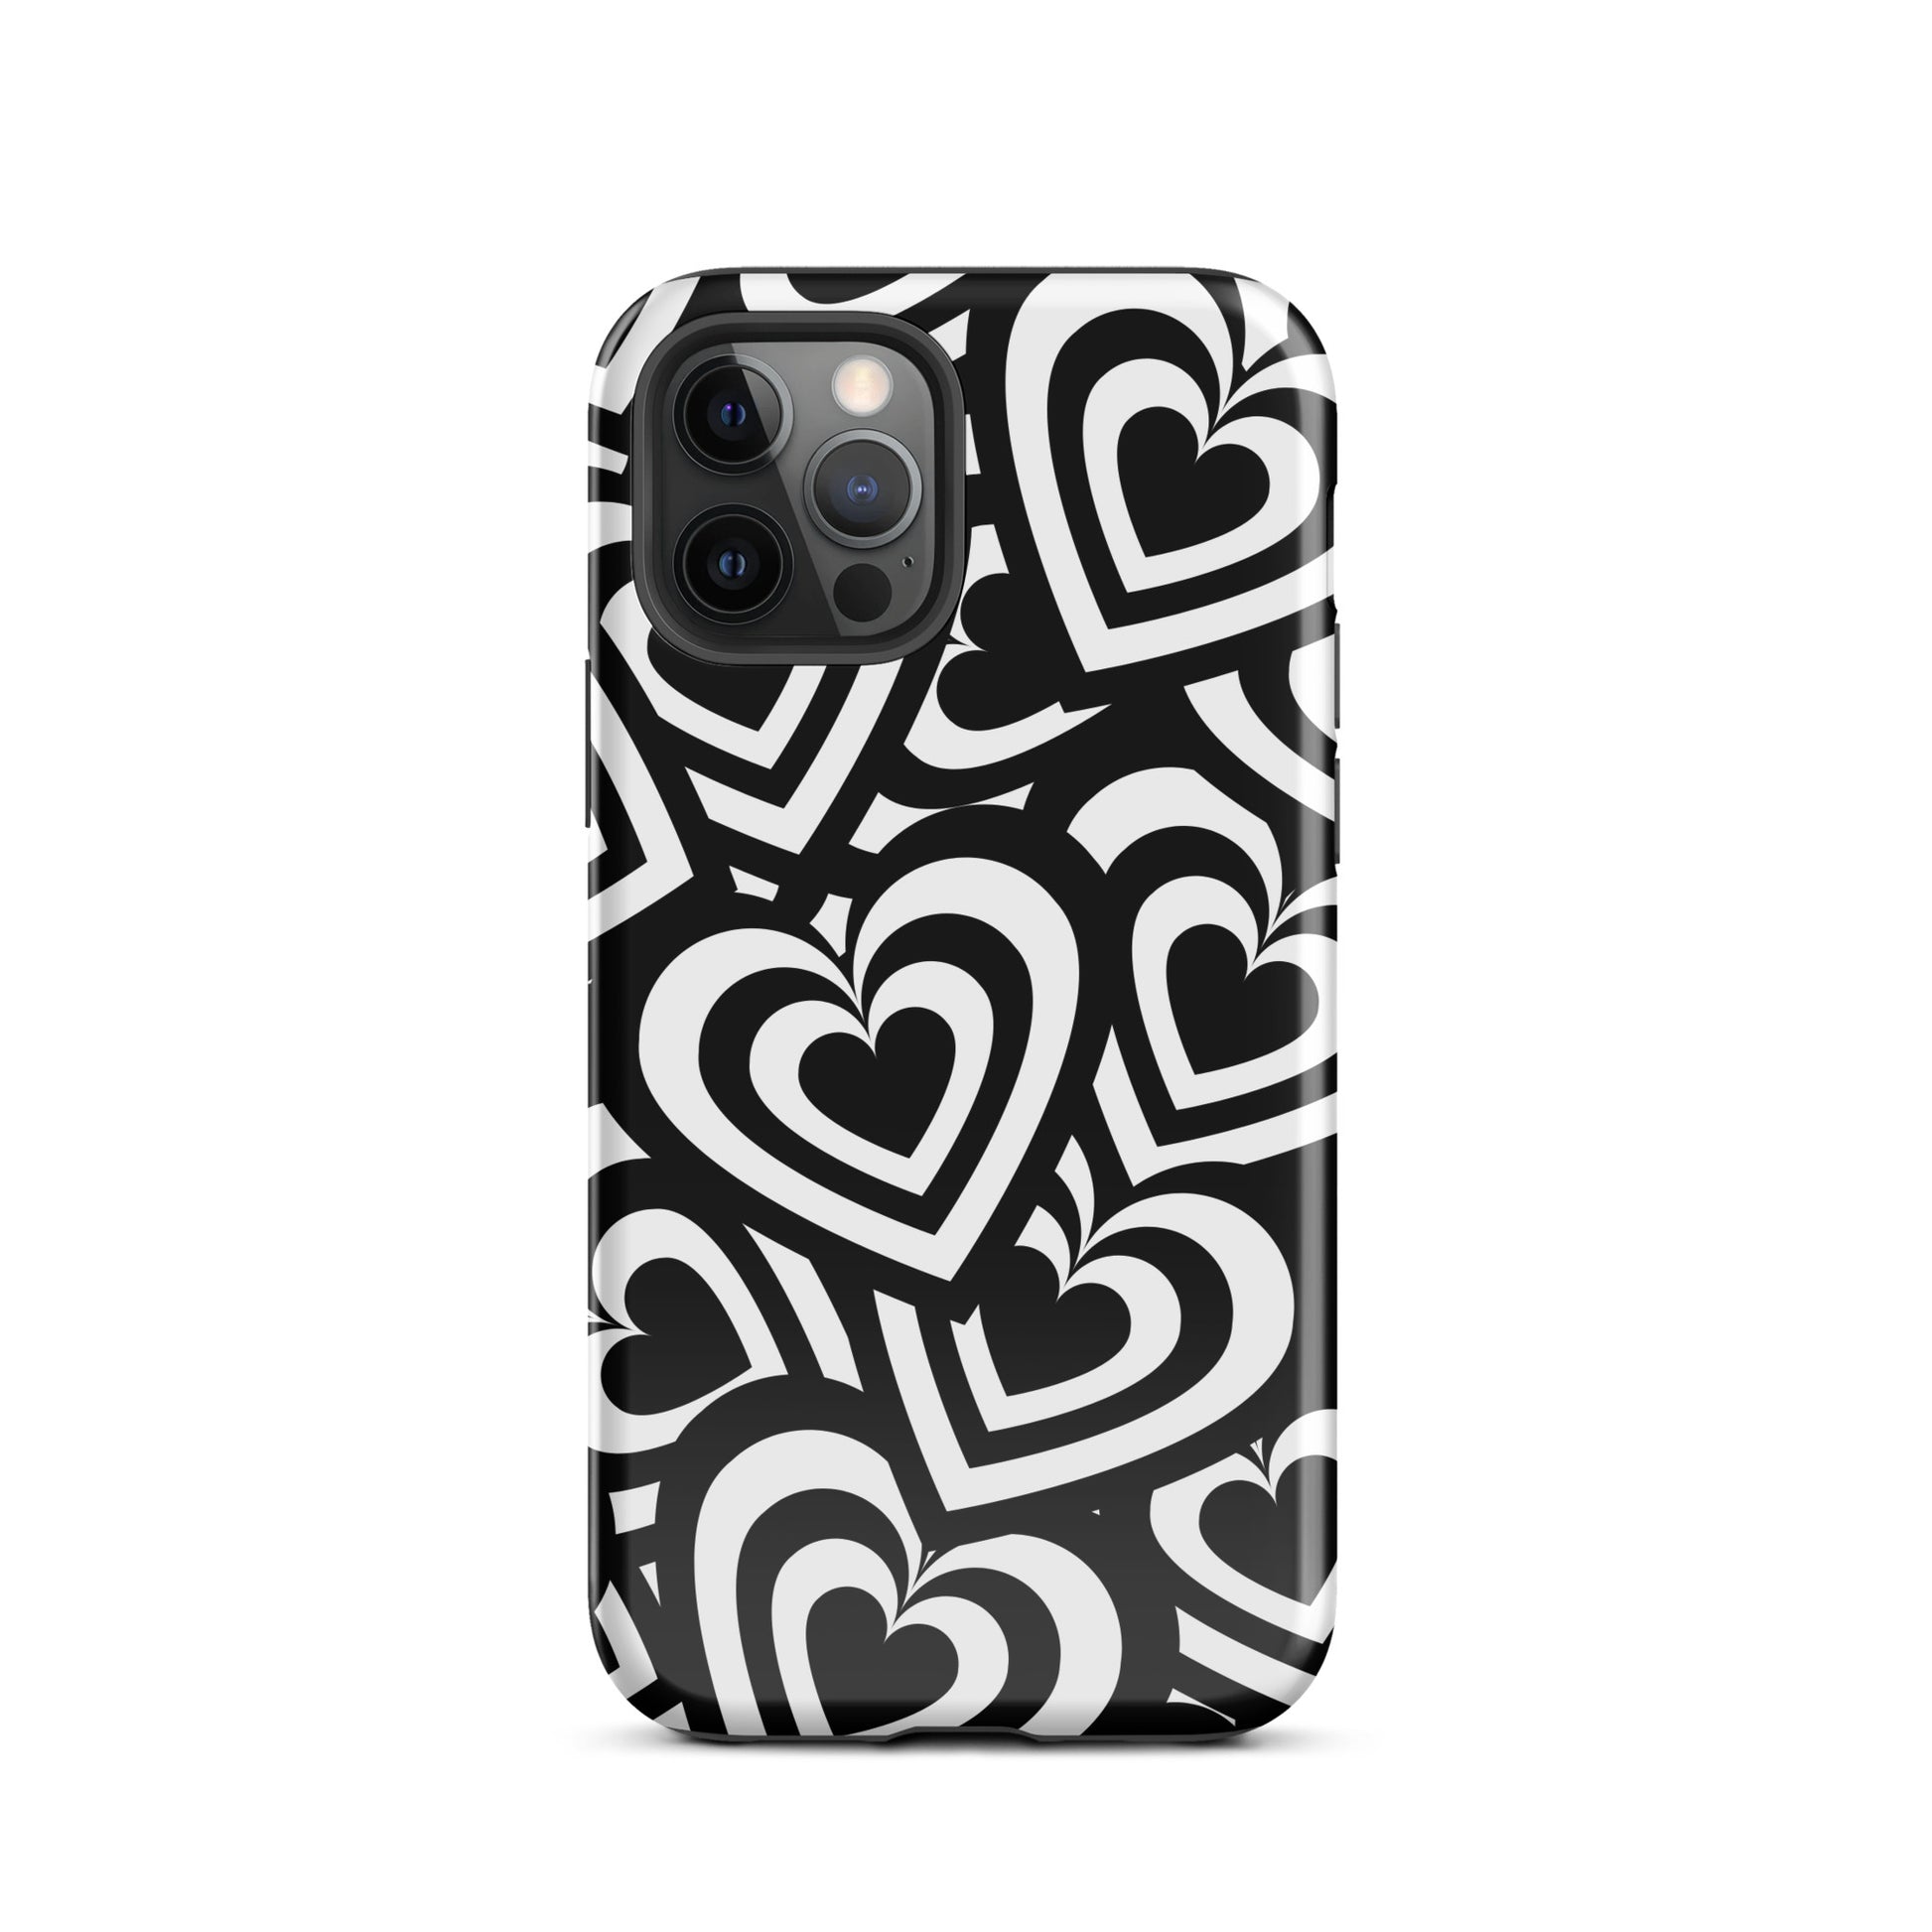 Black & White Hearts iPhone Case iPhone 12 Pro Glossy